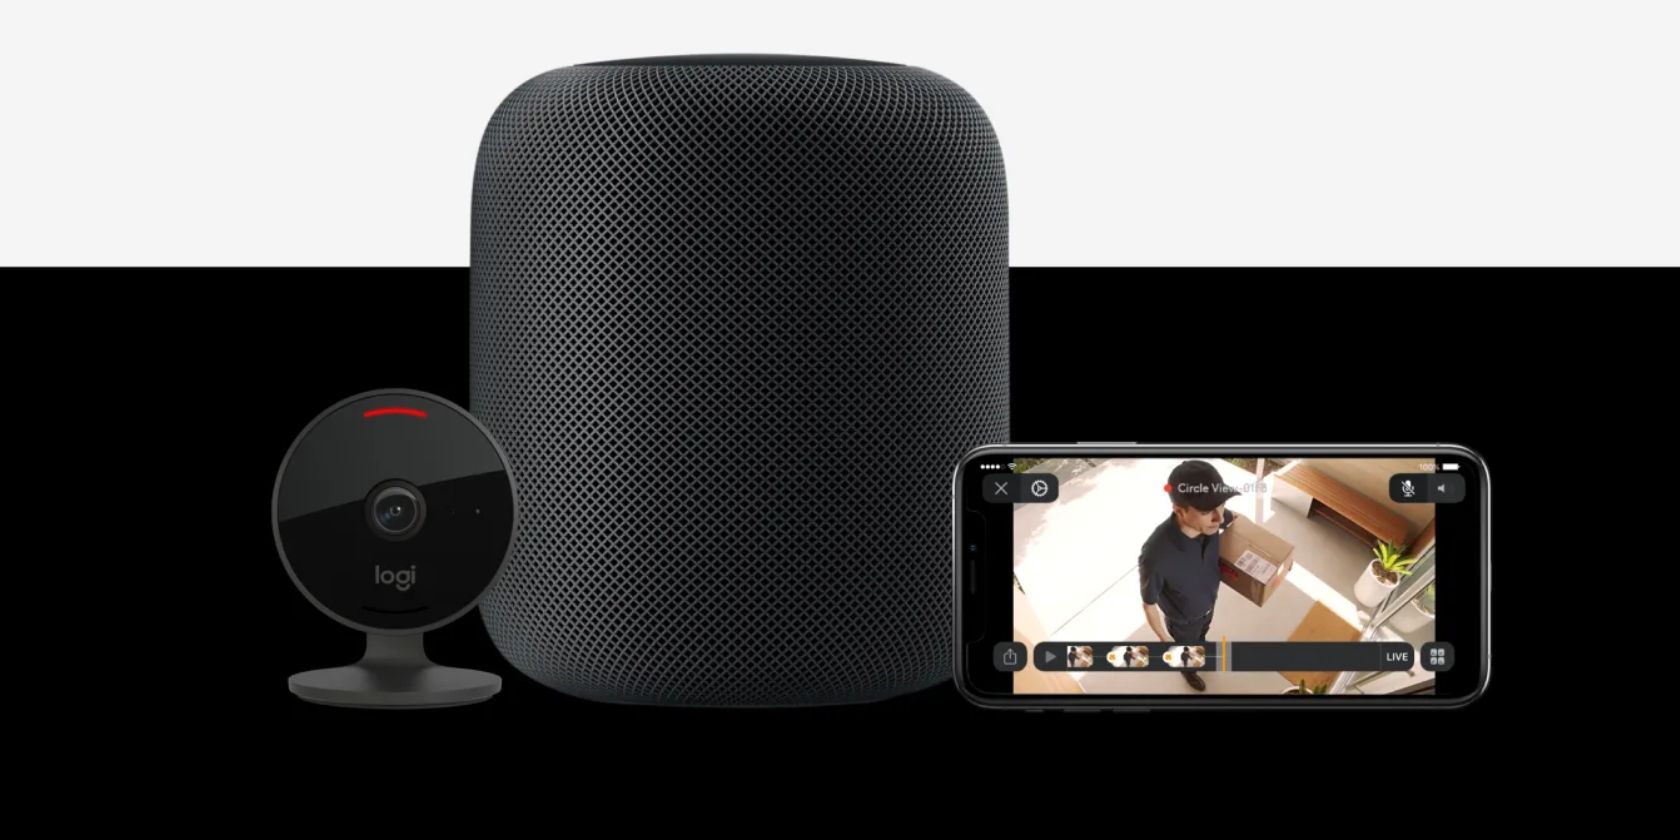 HomeKit Secure Video Recording Displayed on an iPhone Next to an Apple HomePod and Logitech Circle View Camera